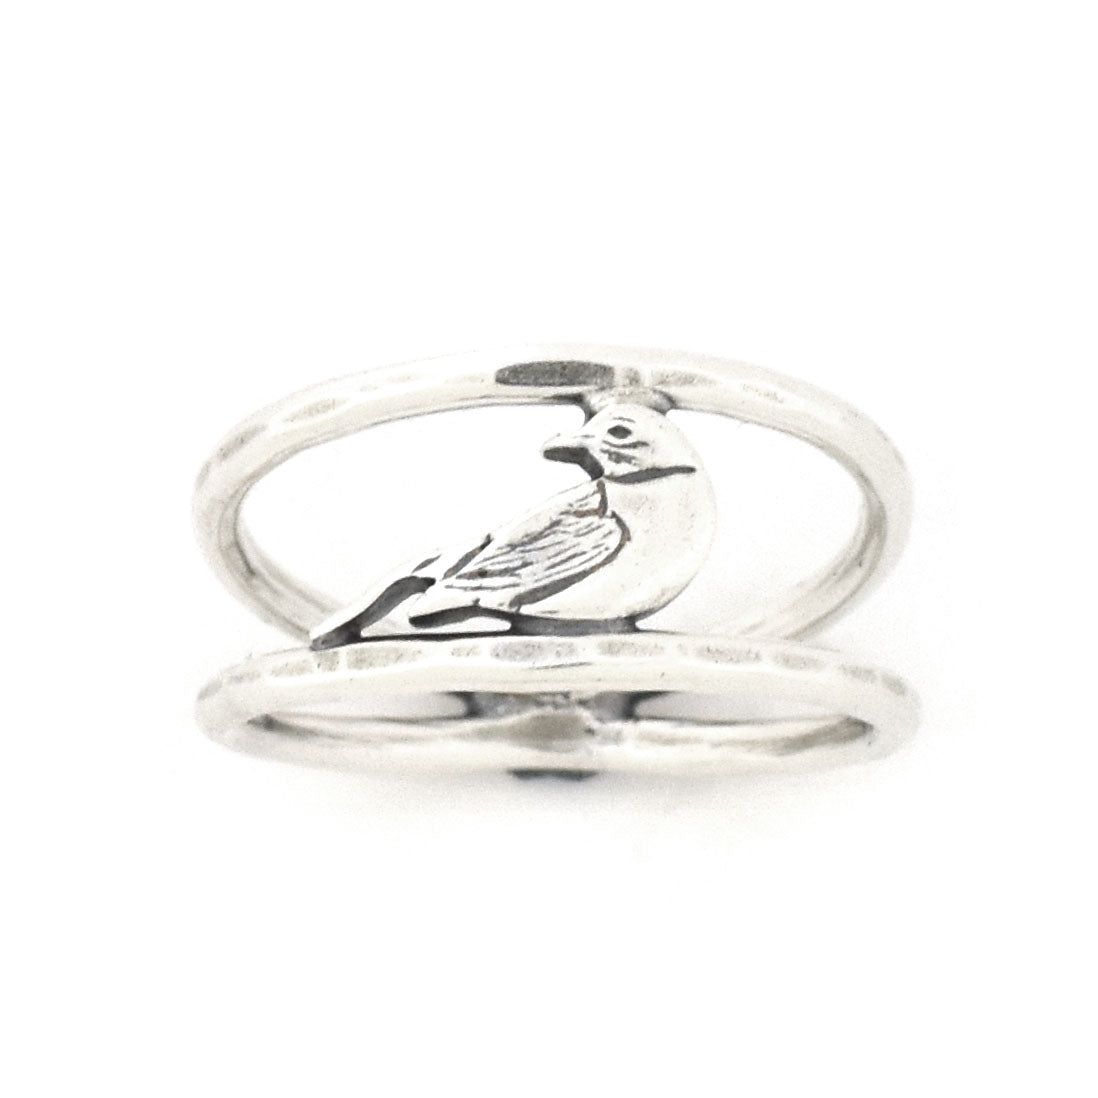 Spring Robin Ring - Ring  Select Size  4 5781 - handmade by Beth Millner Jewelry